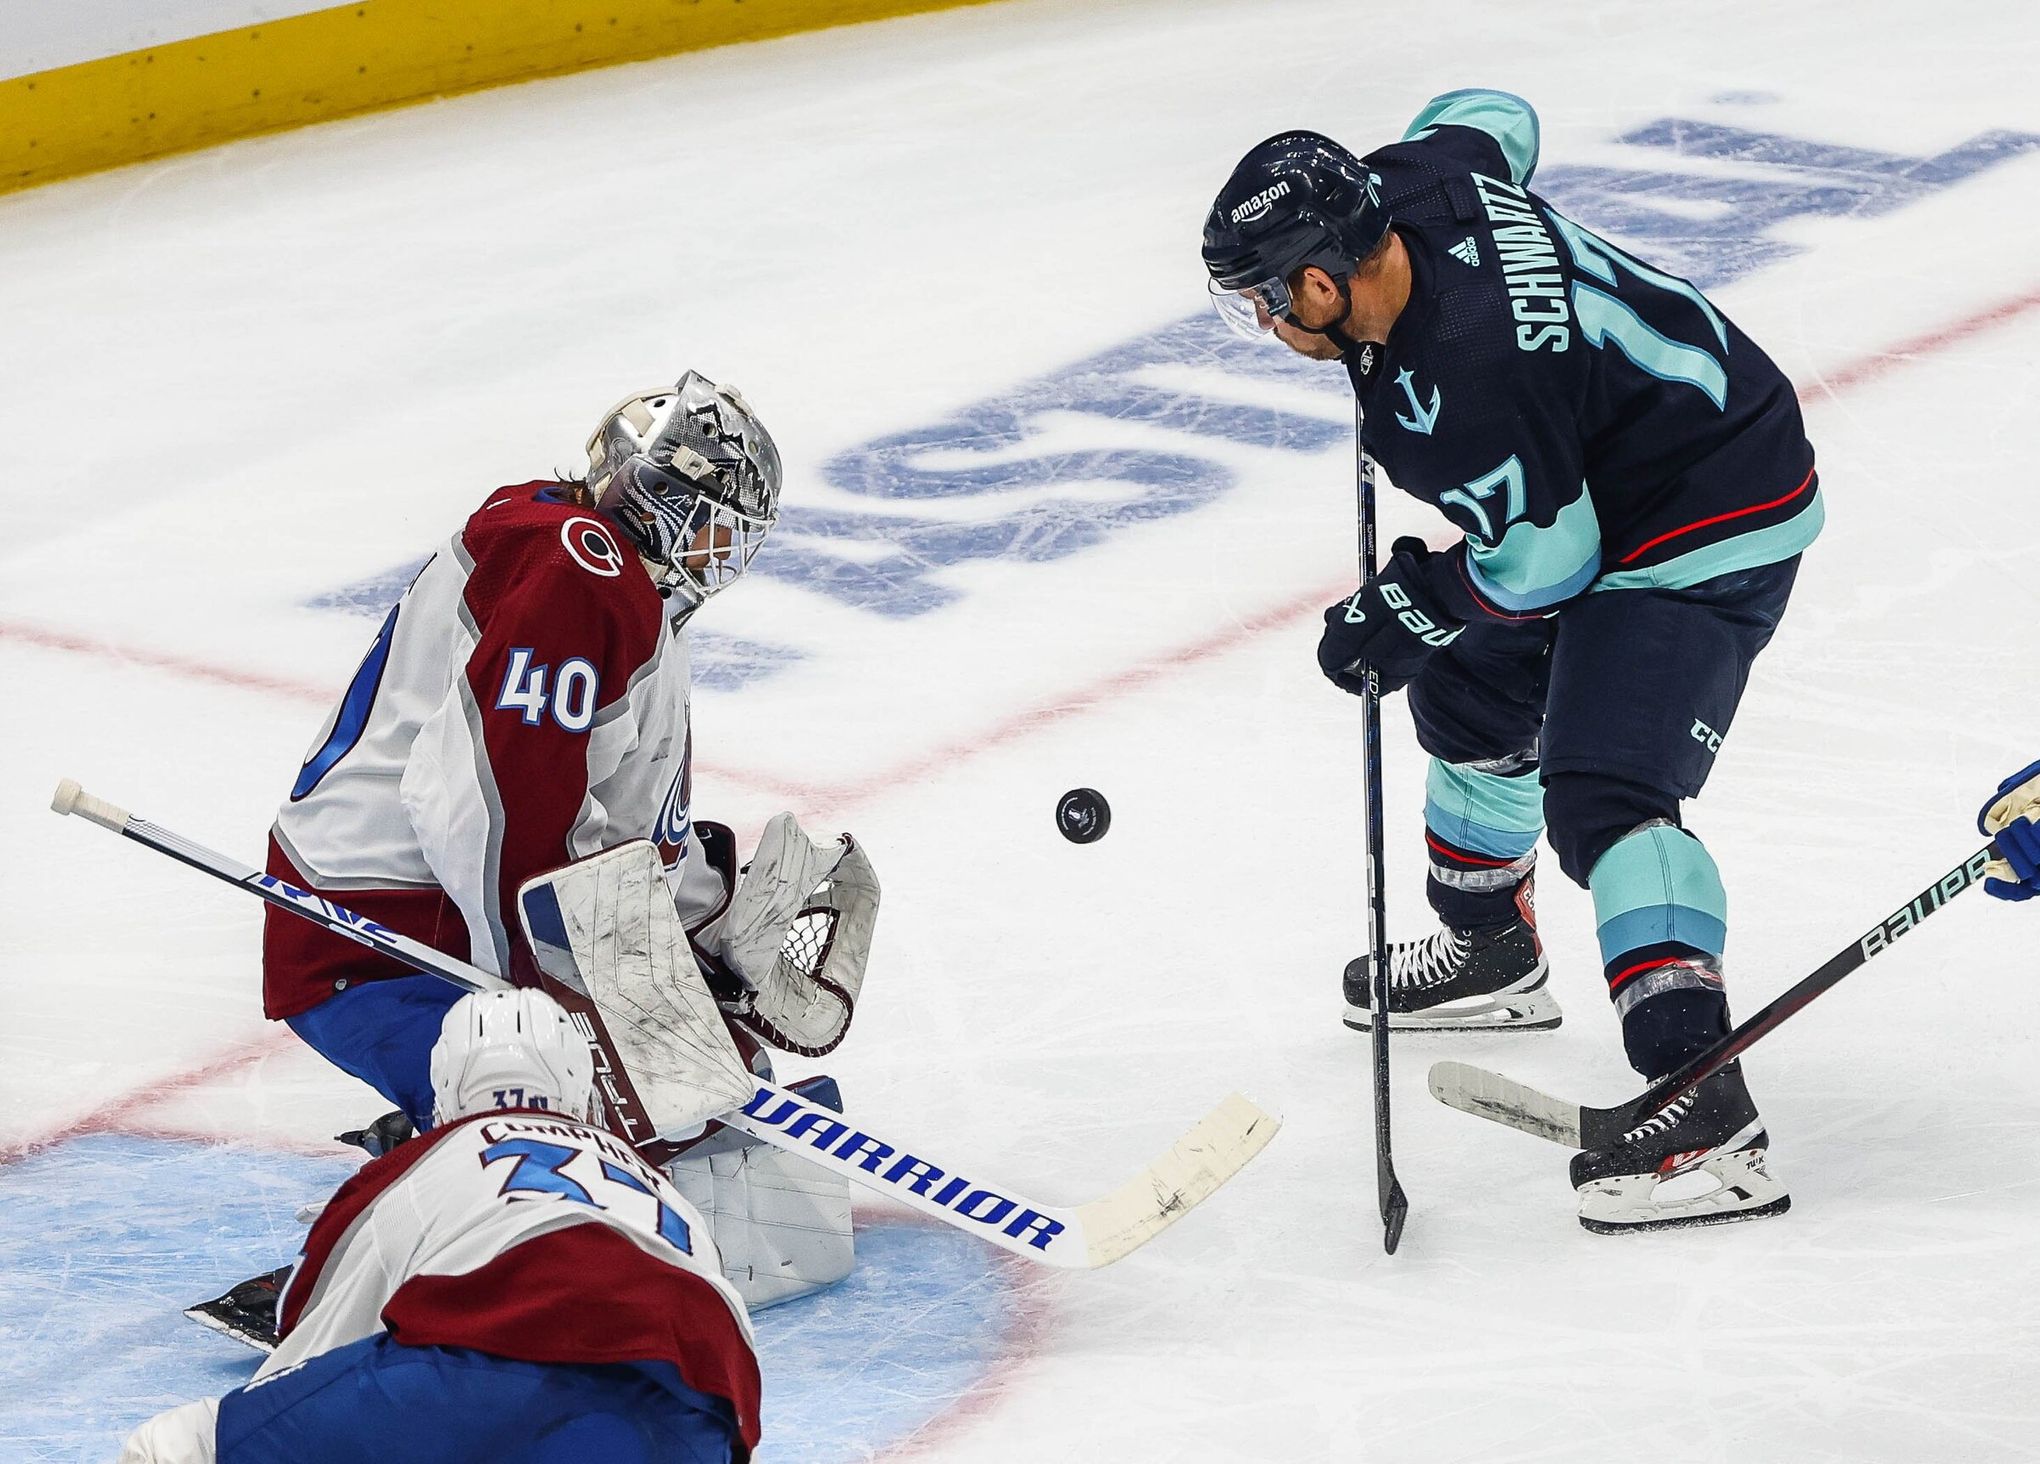 Three Colorado Avalanche players to remember when playing a game